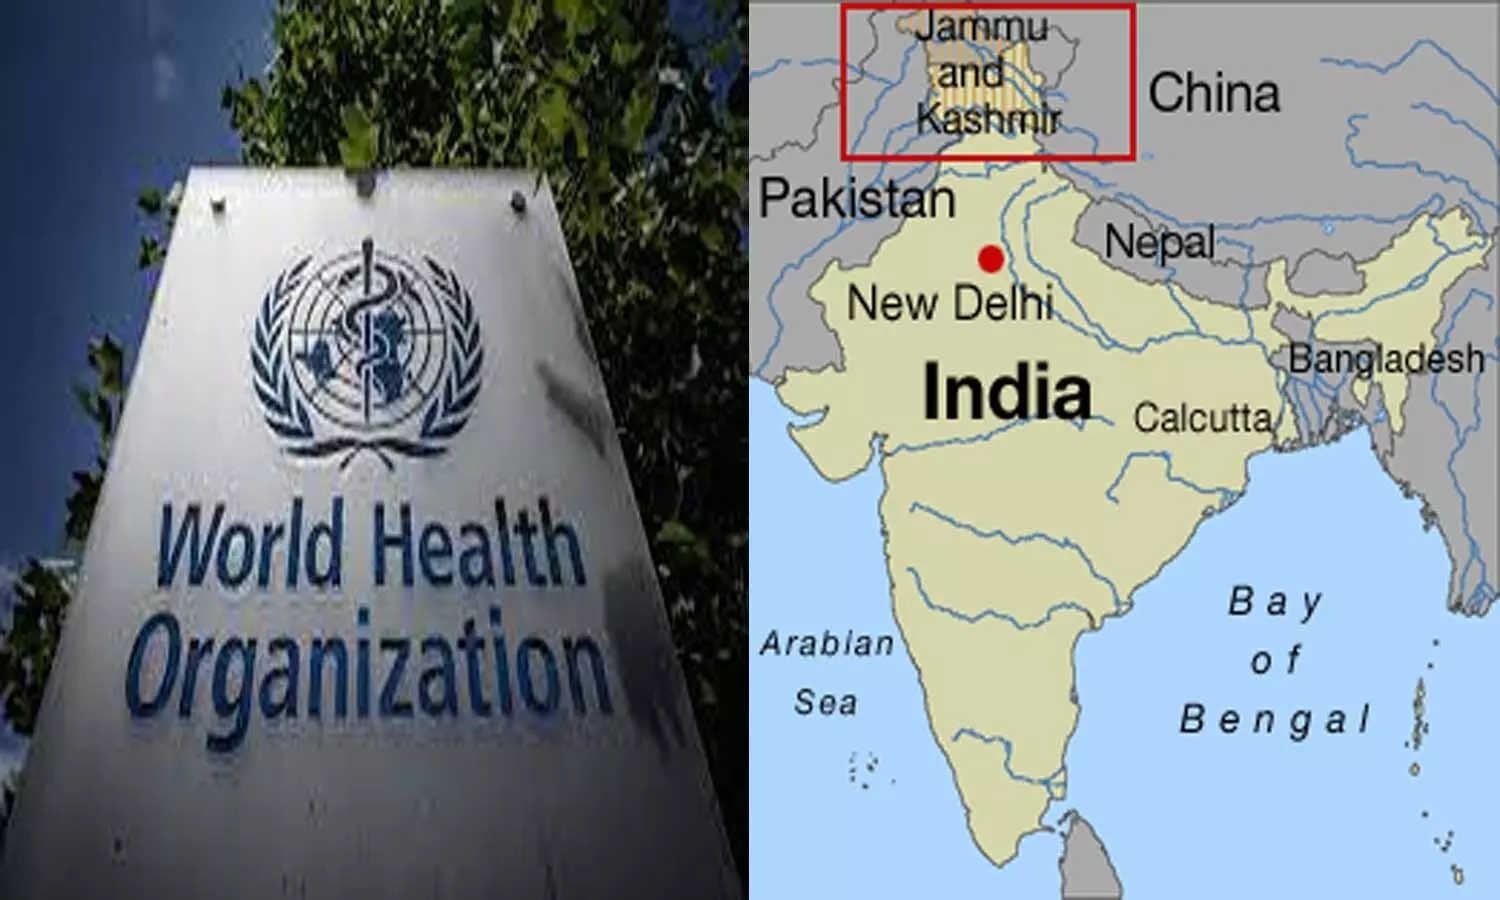 WHO Map Controversy: Controversy over World Health Organization map, showing Jammu and Kashmir as part of Pakistan and China